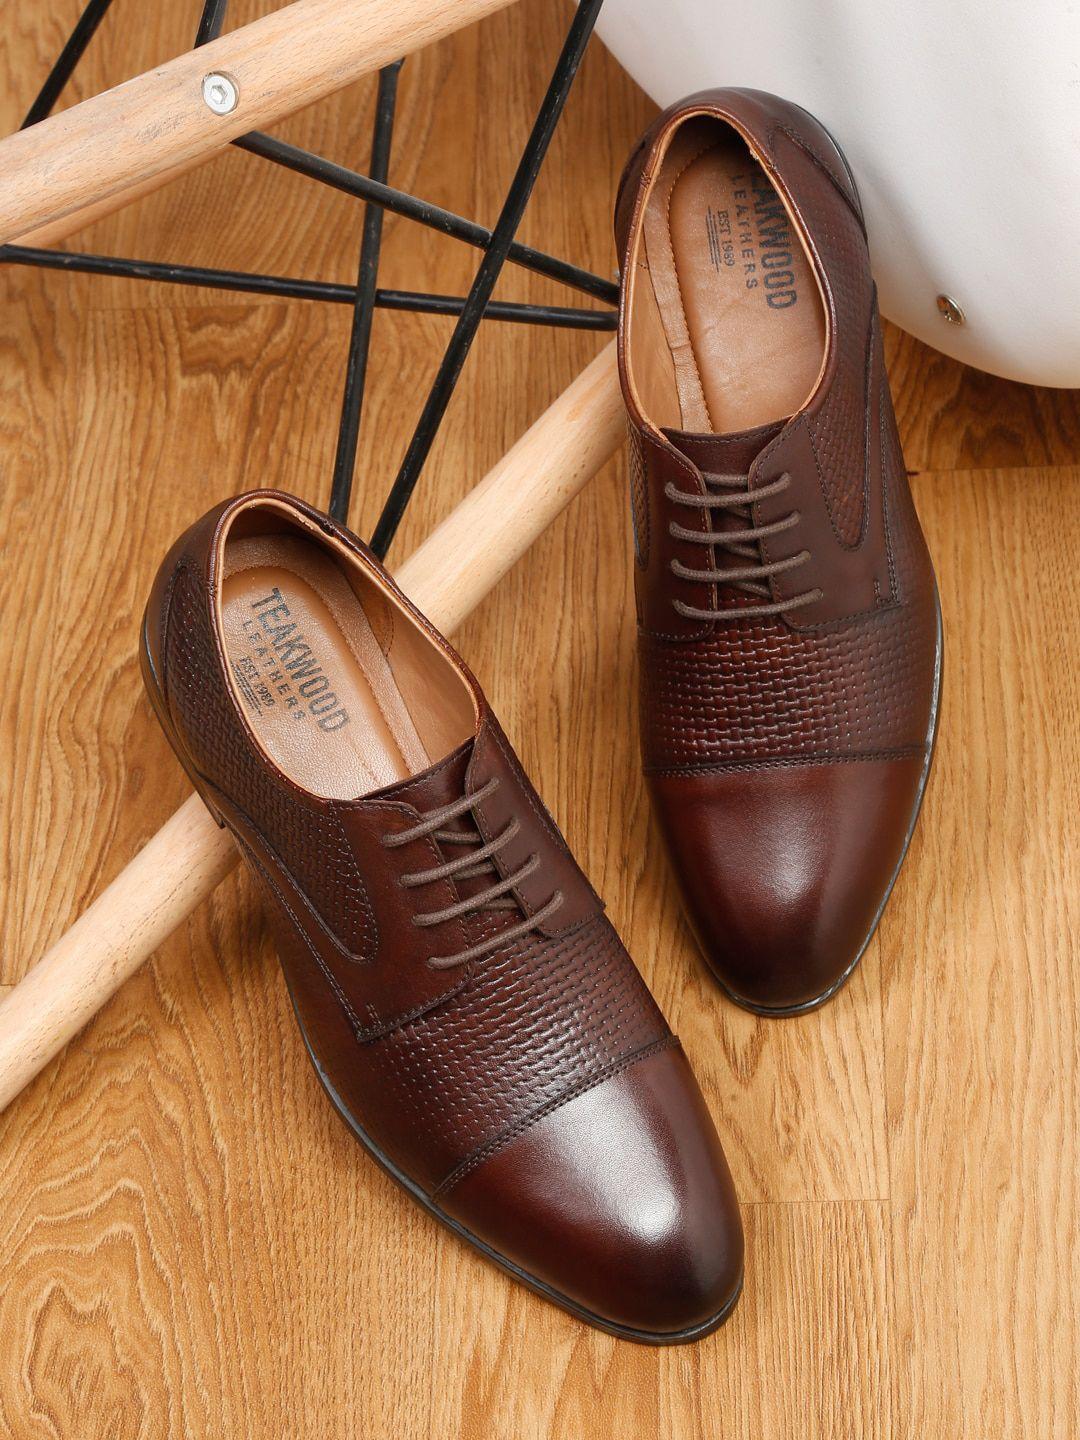 teakwood leathers men perforations leather oxfords formal shoes